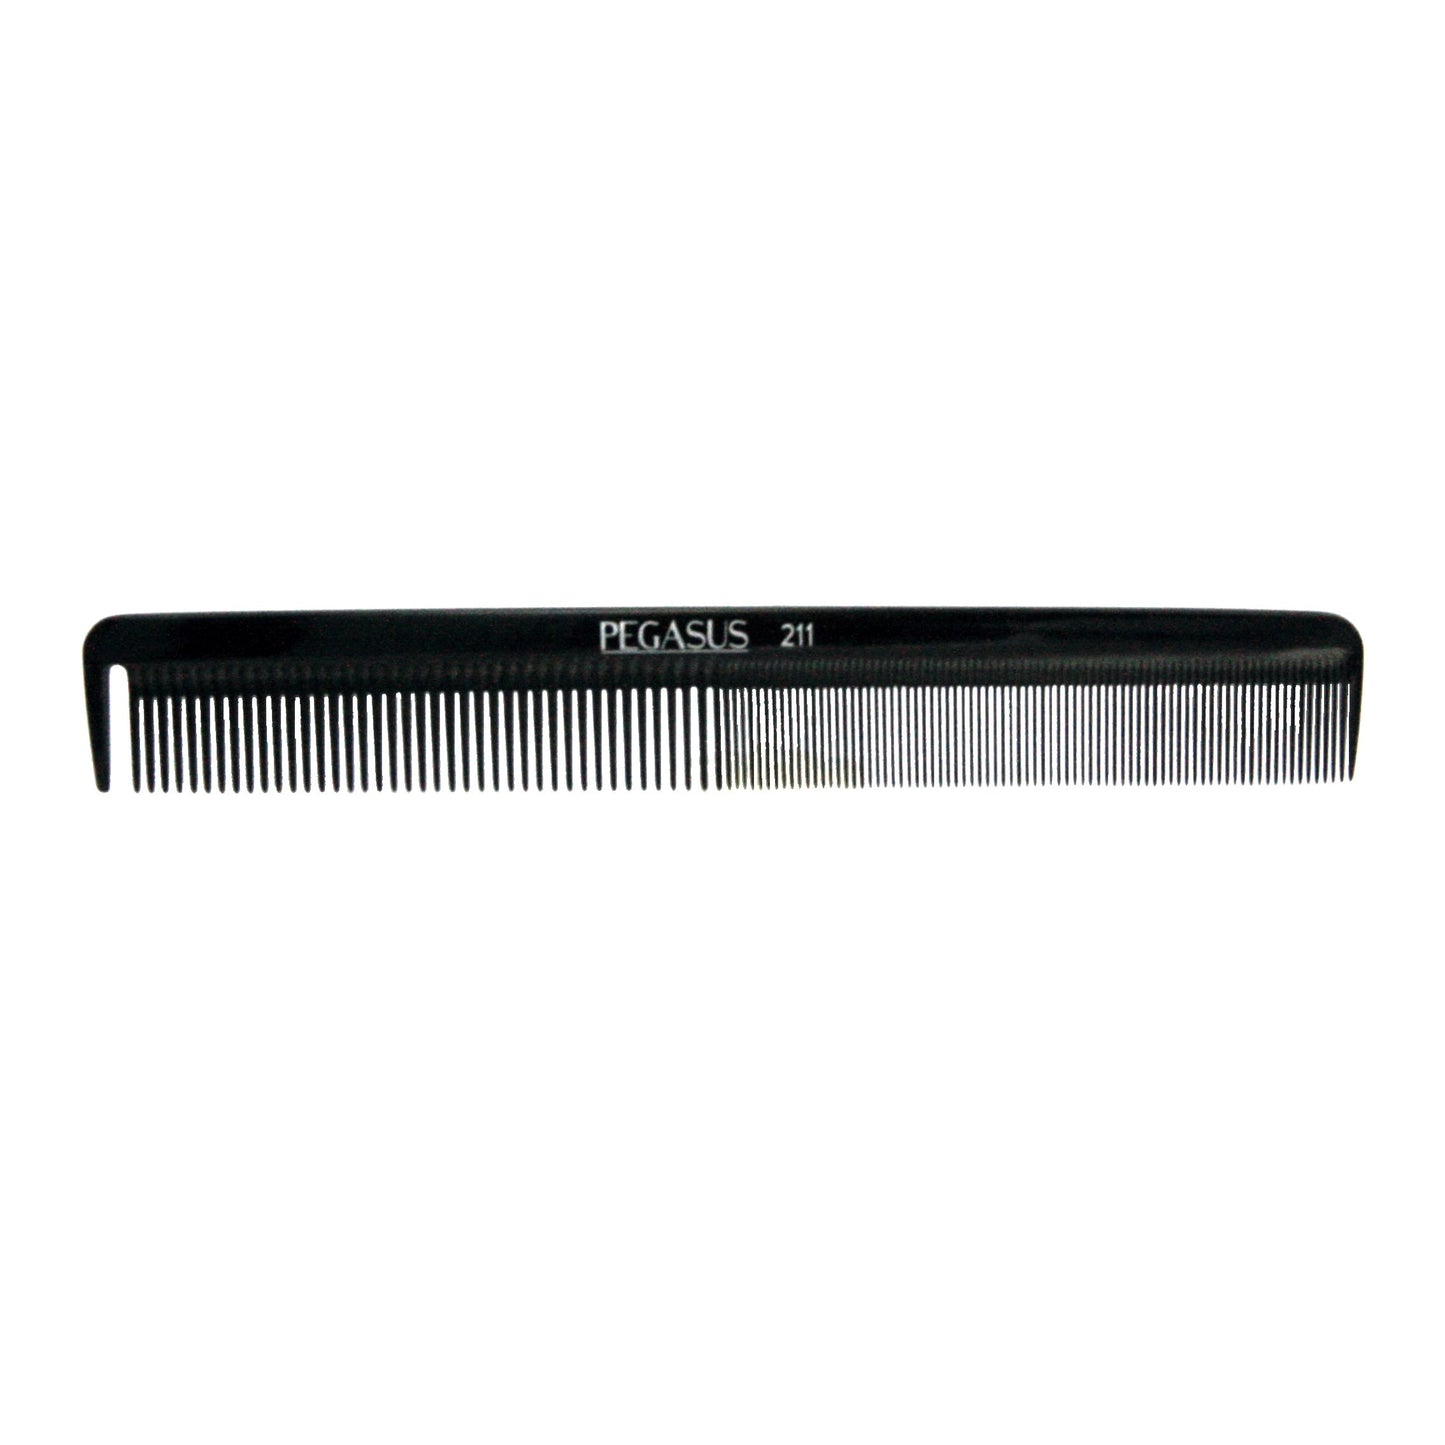 Pegasus 211, 9in Hard Rubber Cutting Comb With Sectioning Tooth and Inch Marks, Anti Static, Heat and Chemically Resistant, Wet Hair, Everyday Grooming Comb | Peines de goma dura - Black